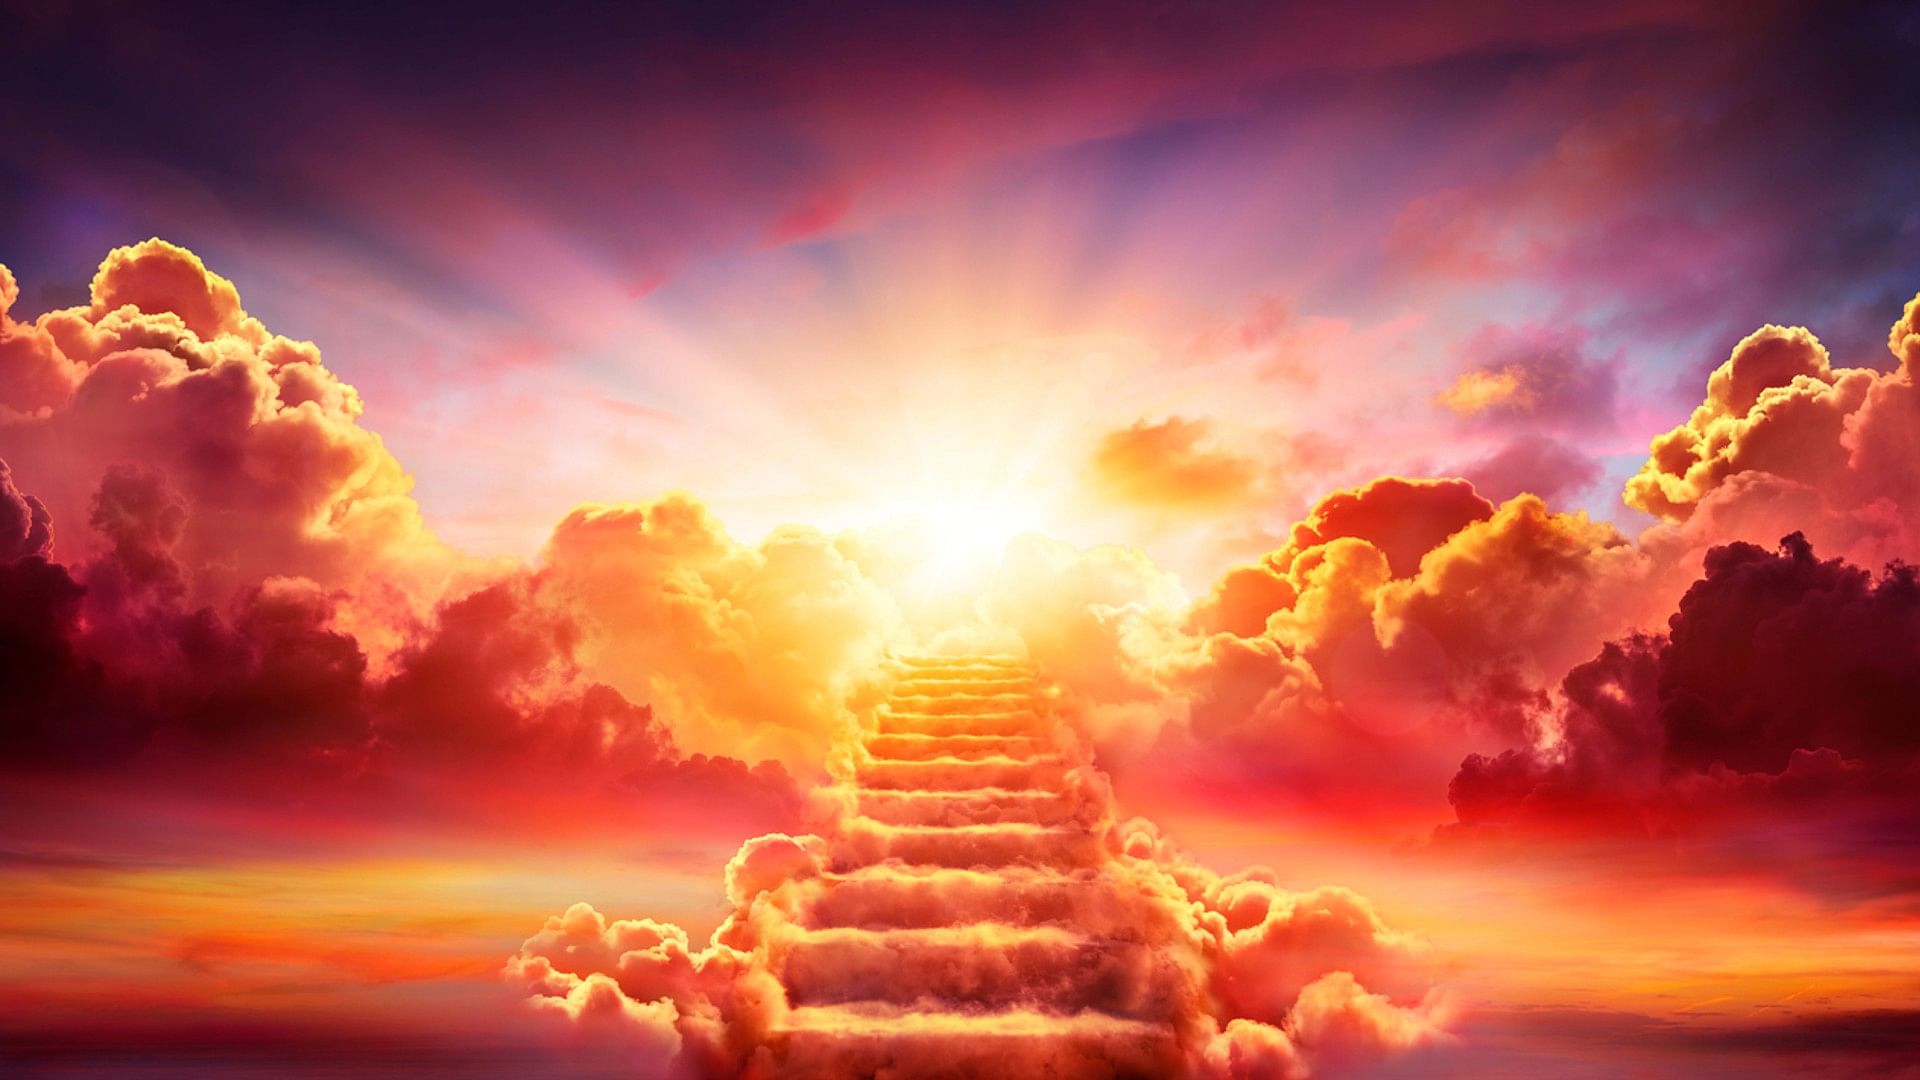 woman shares how heaven looks after spending five years in heaven